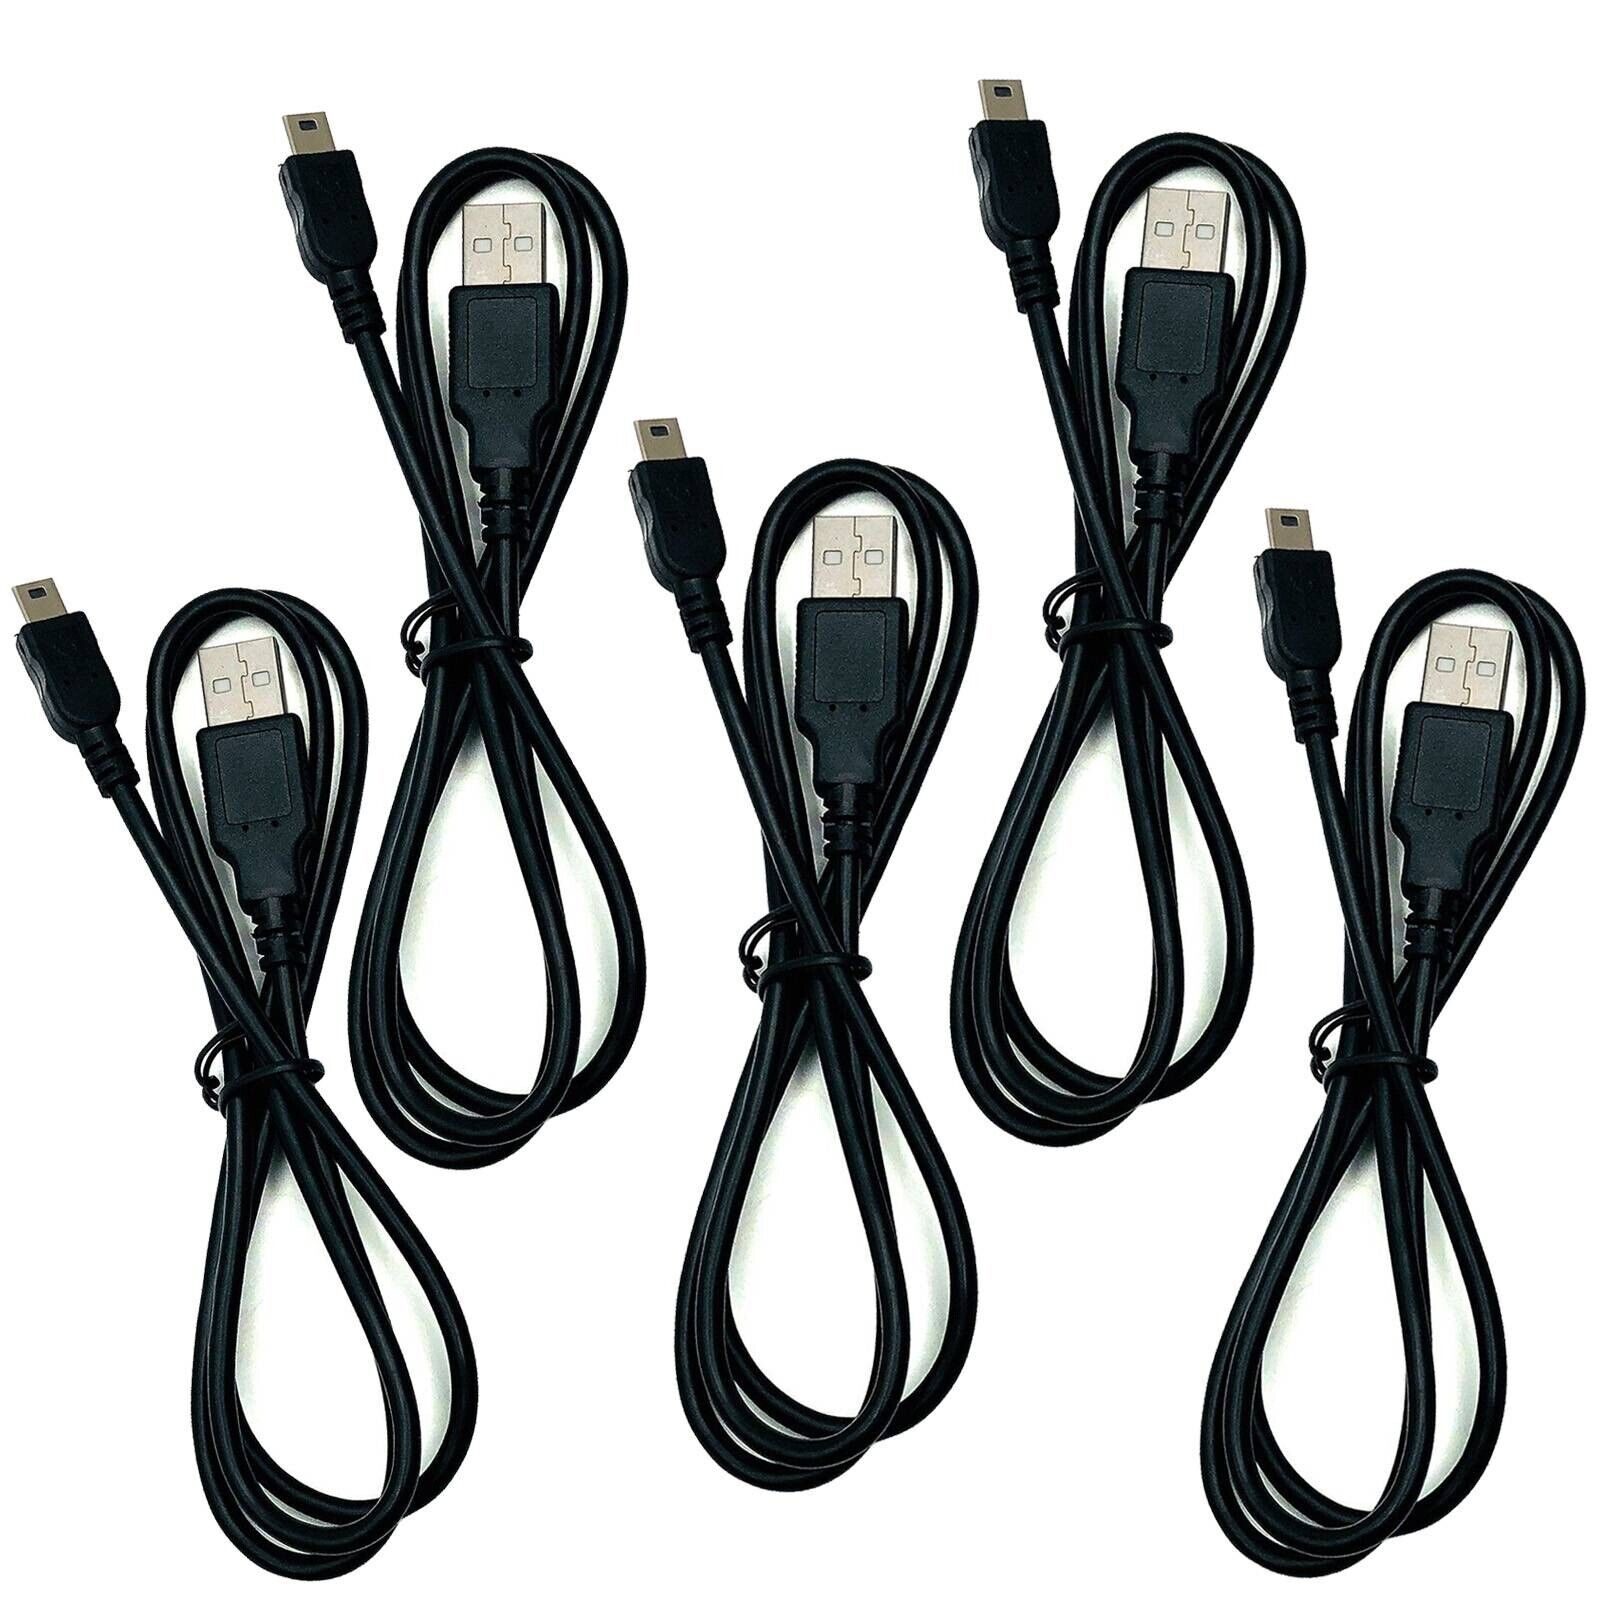 Lot of 5 Quality Monoprice PID 3896 USB A to Mini-B5-03 Cable 3 Foot Long